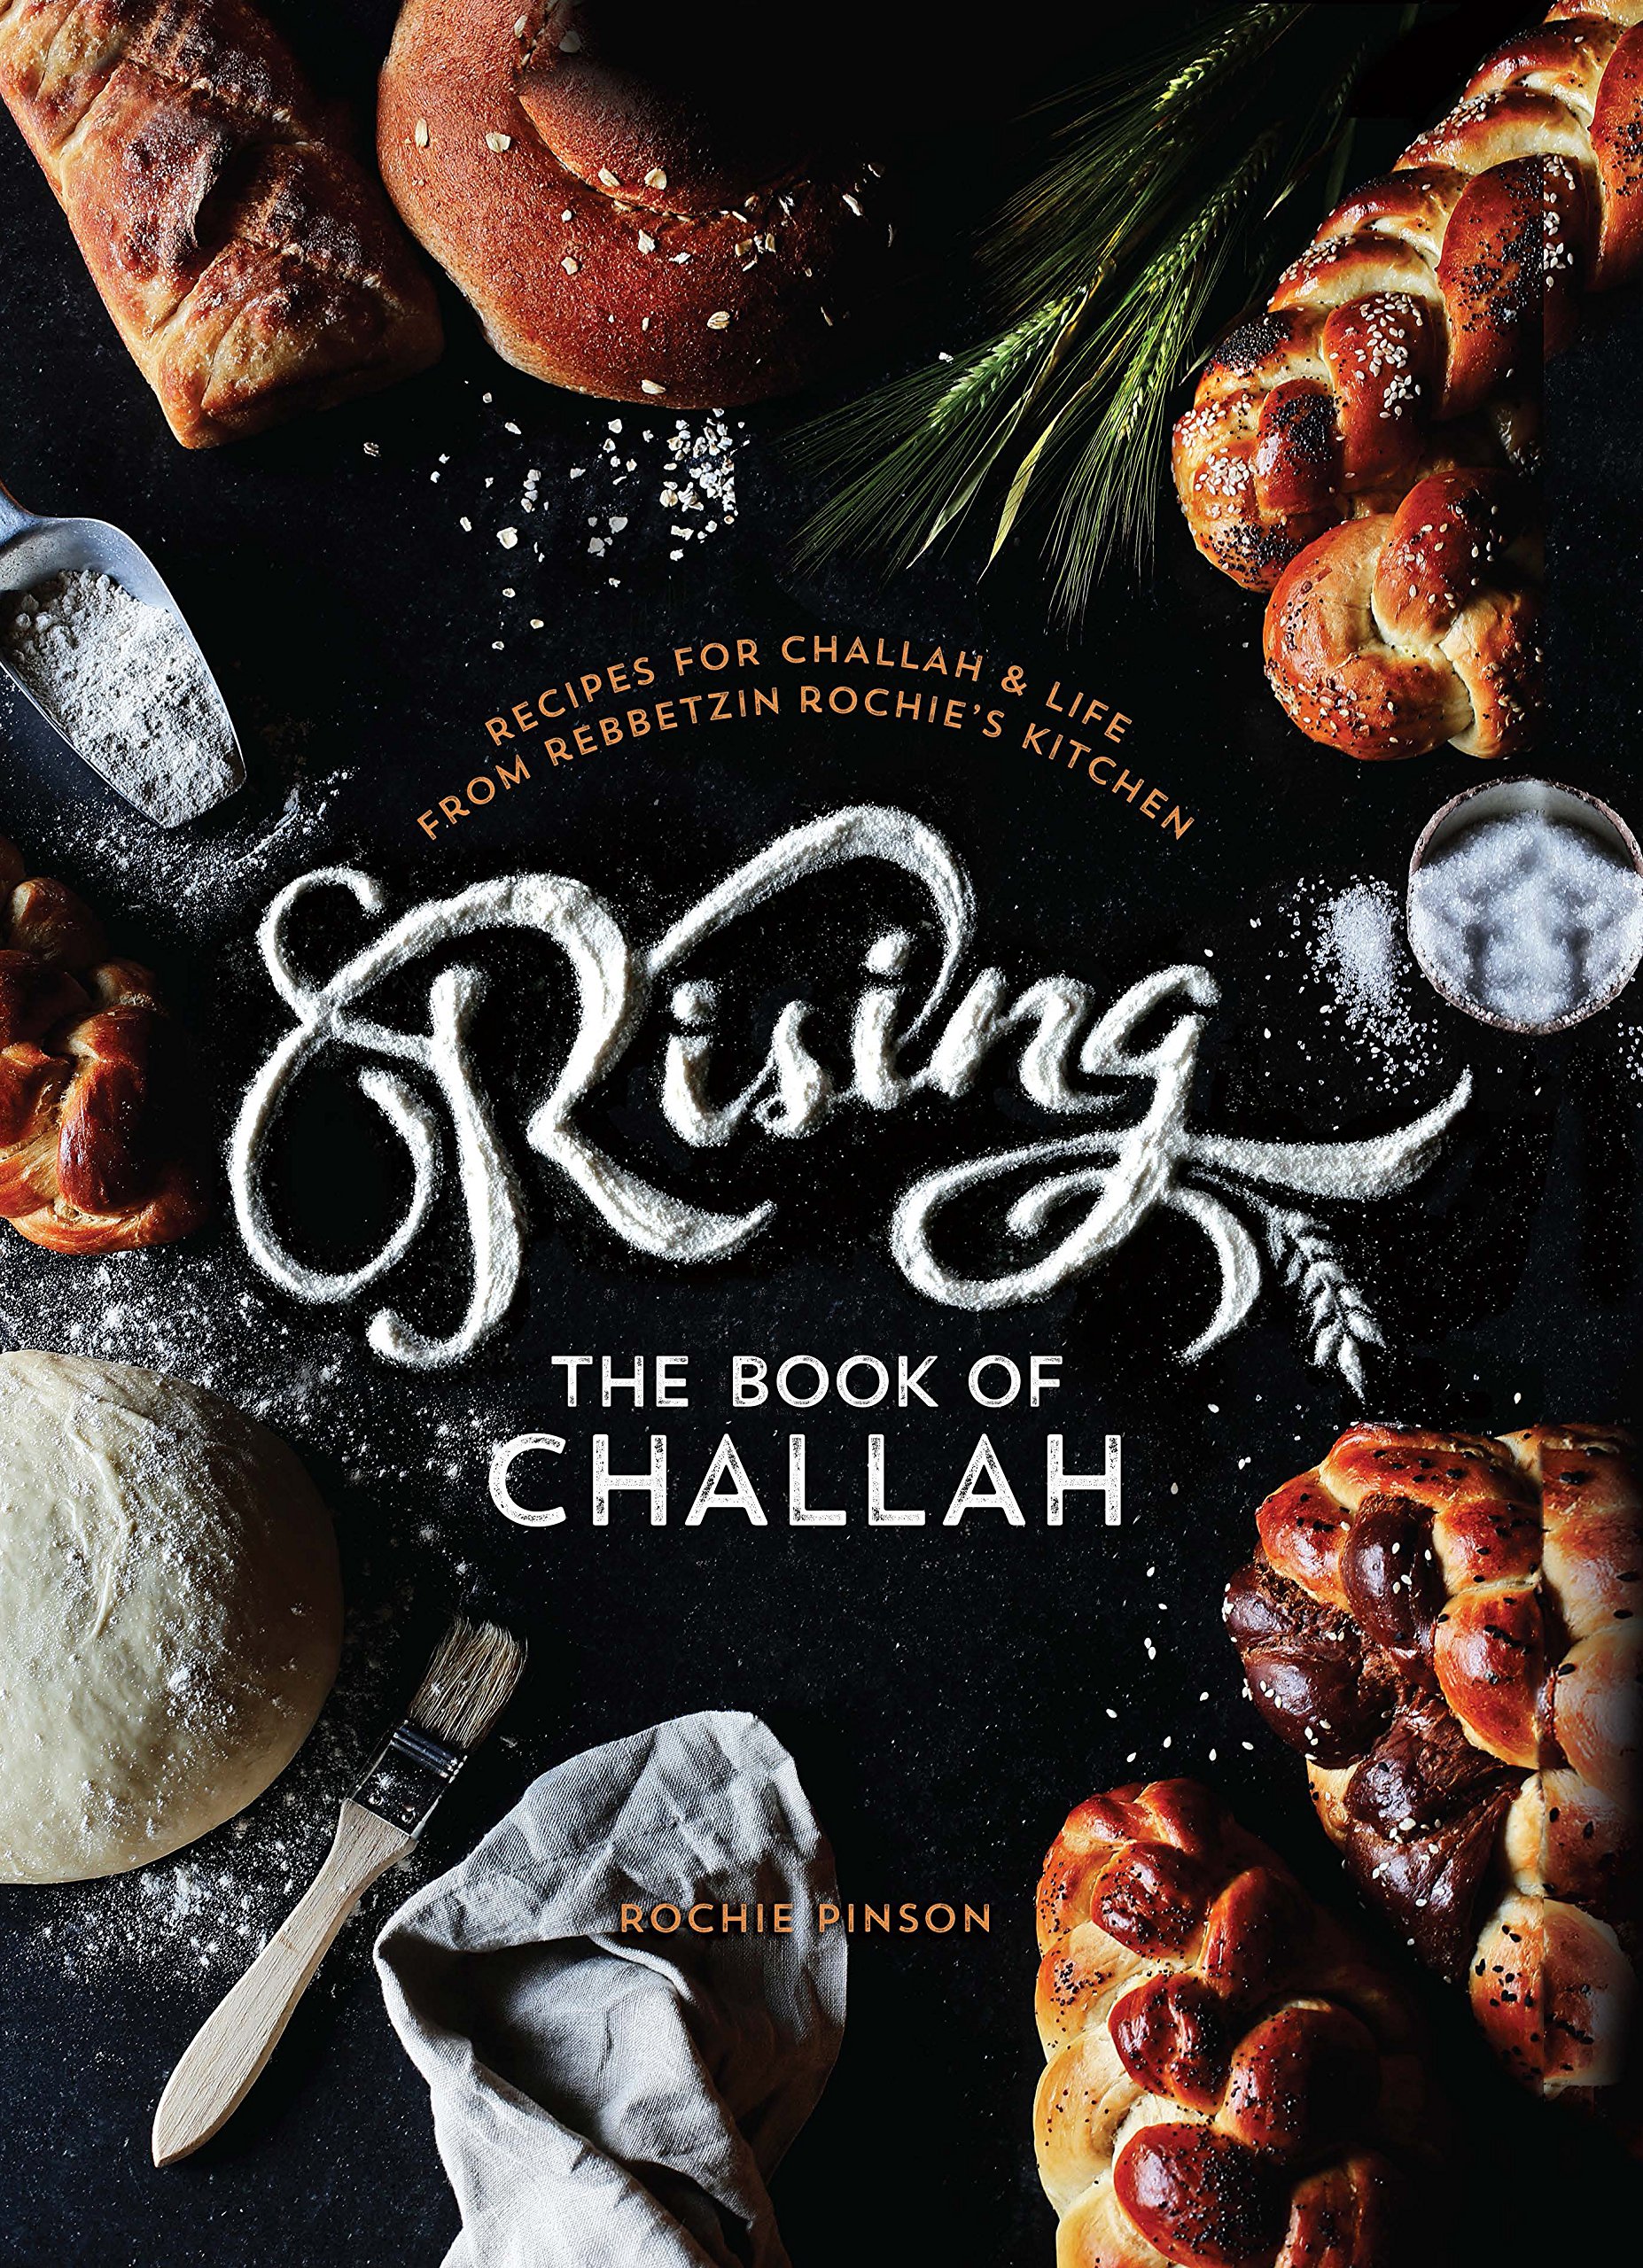 Rising: The Book of Challah